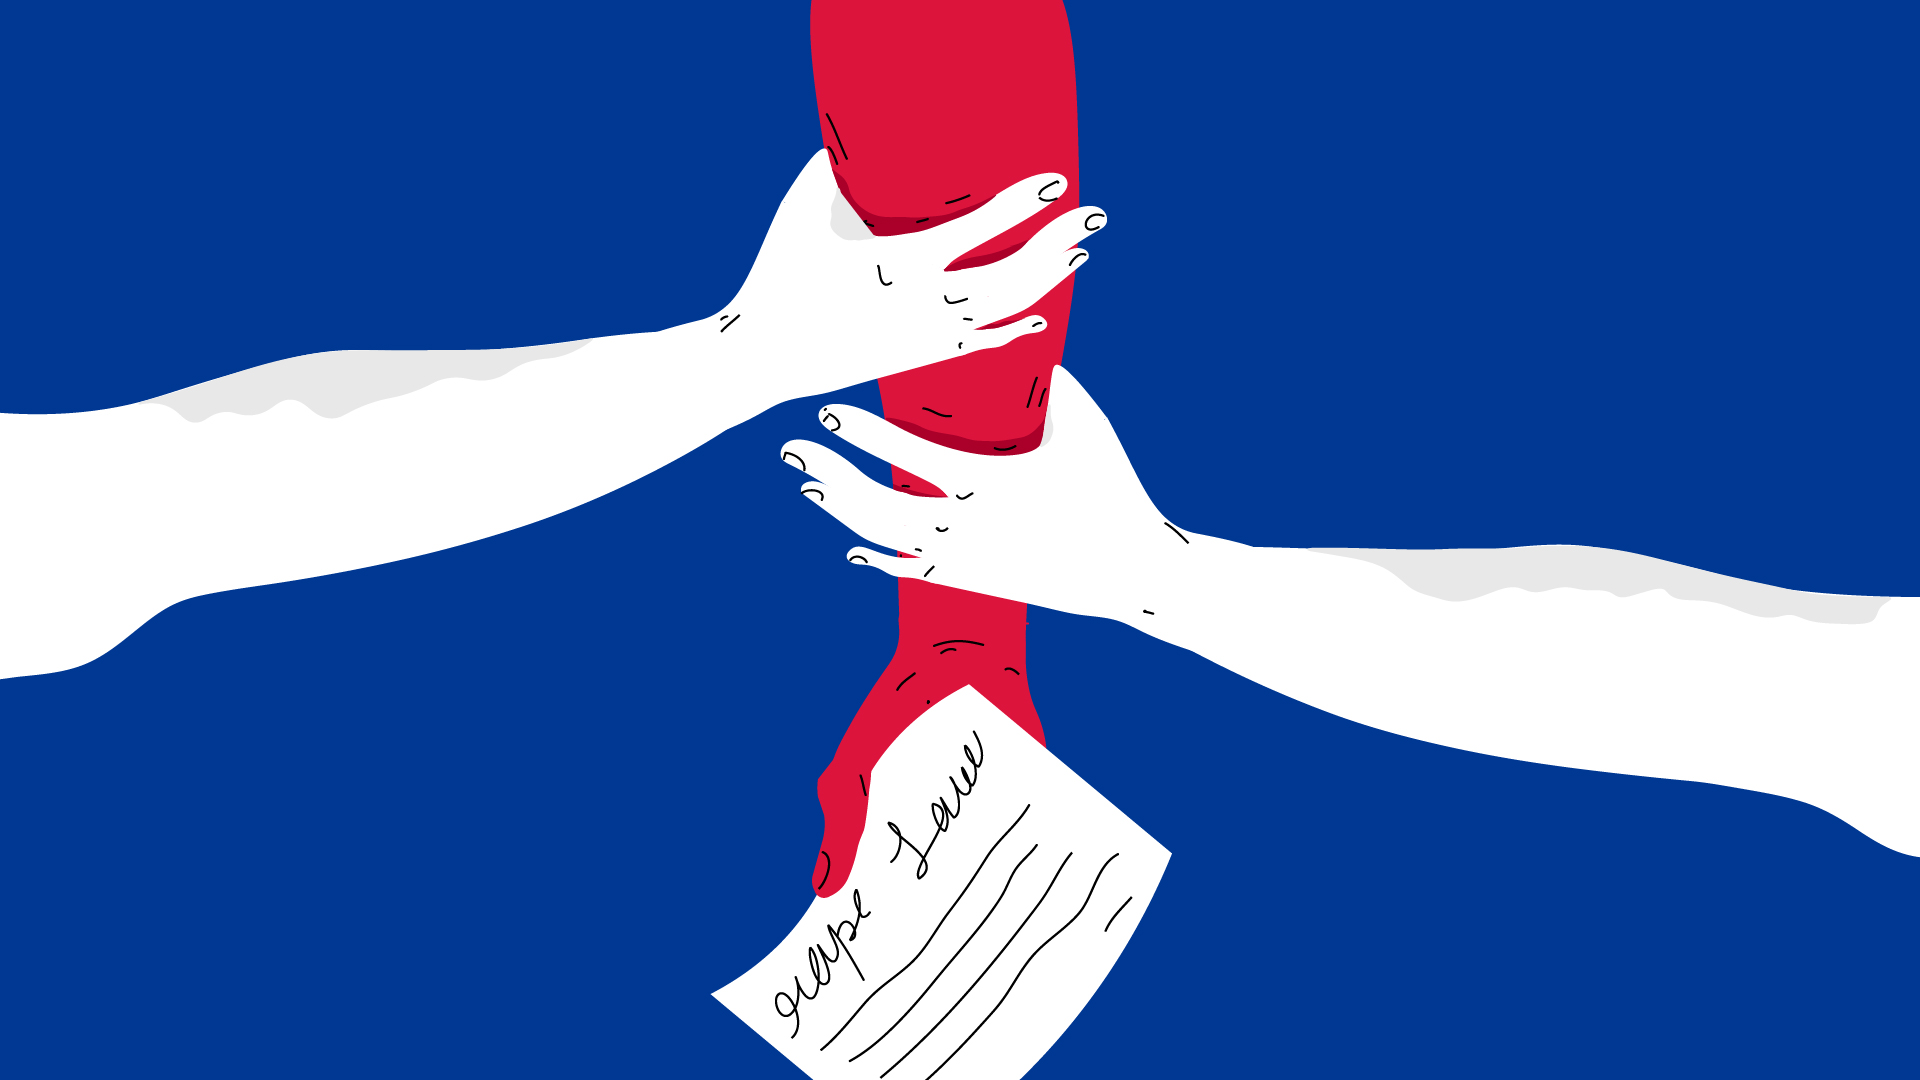 an illustration of two hands restraining a hand holding a paper saying rape law